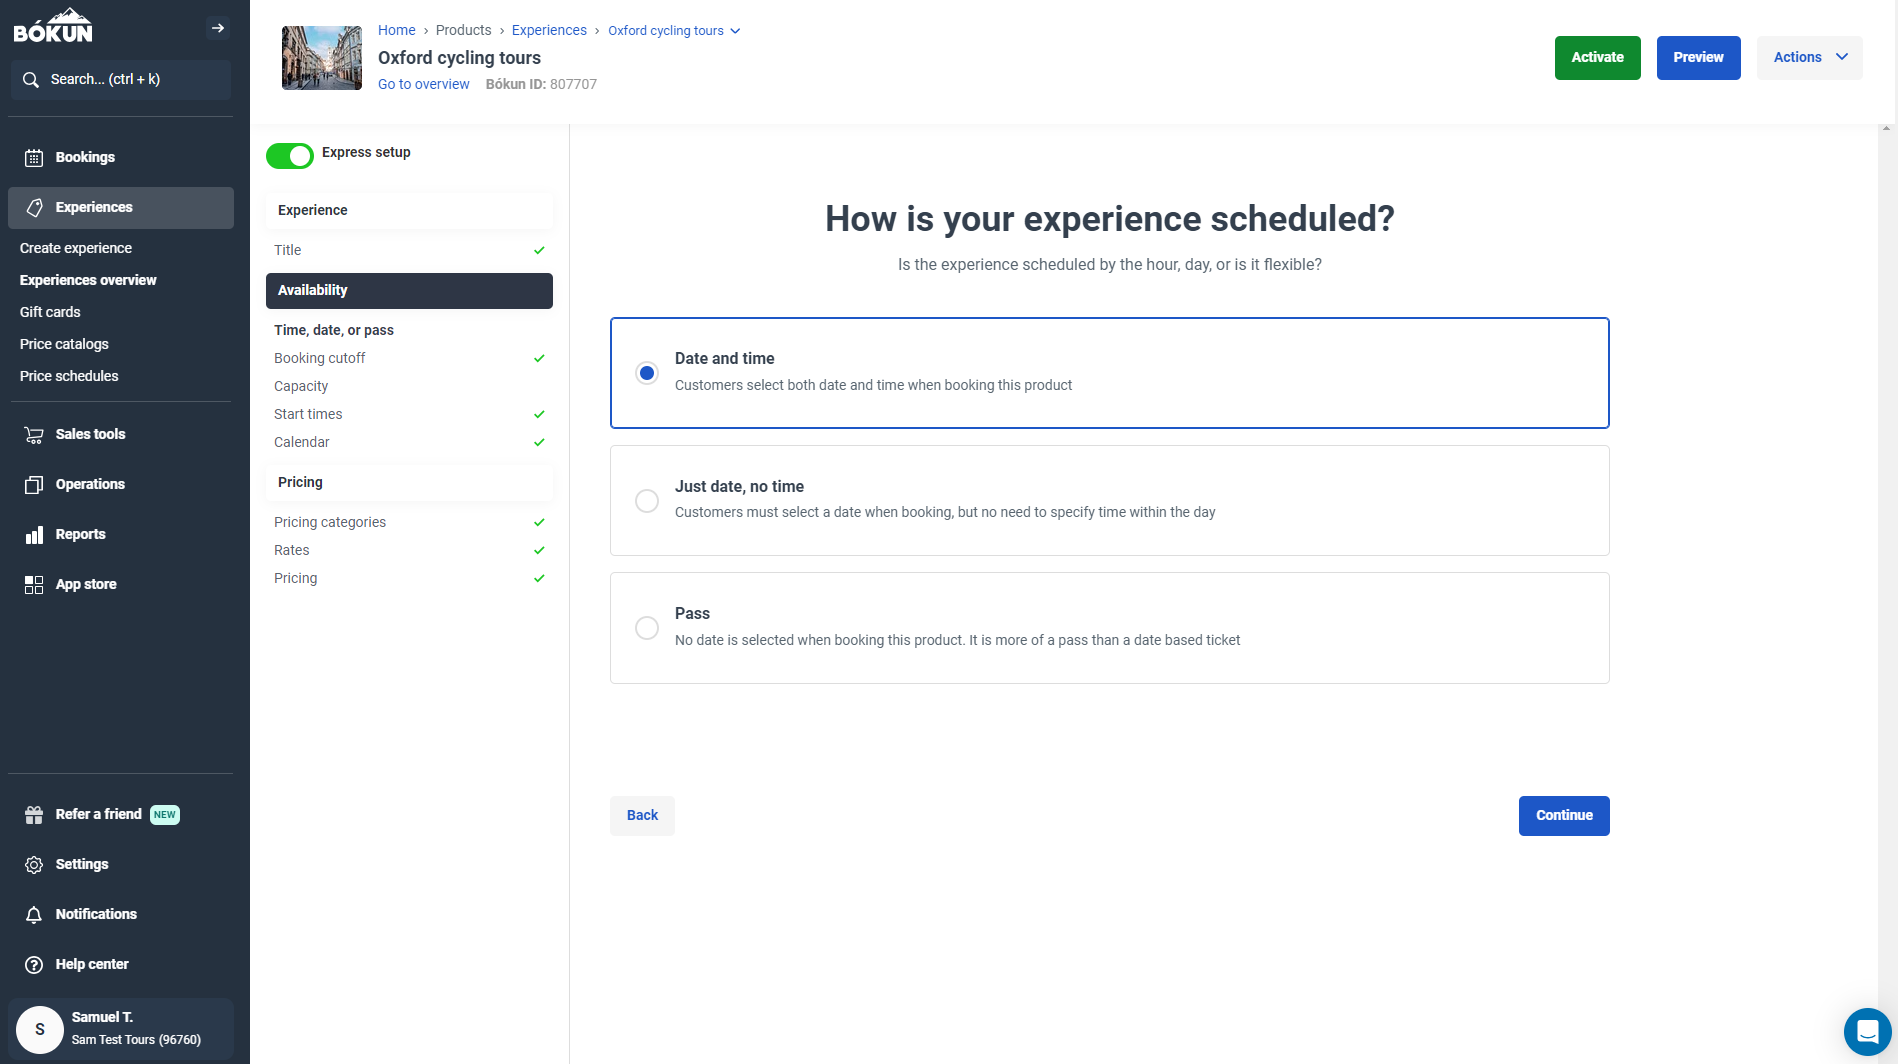 How is your experience scheduled? (Date and time; Just date, no time; Pass)